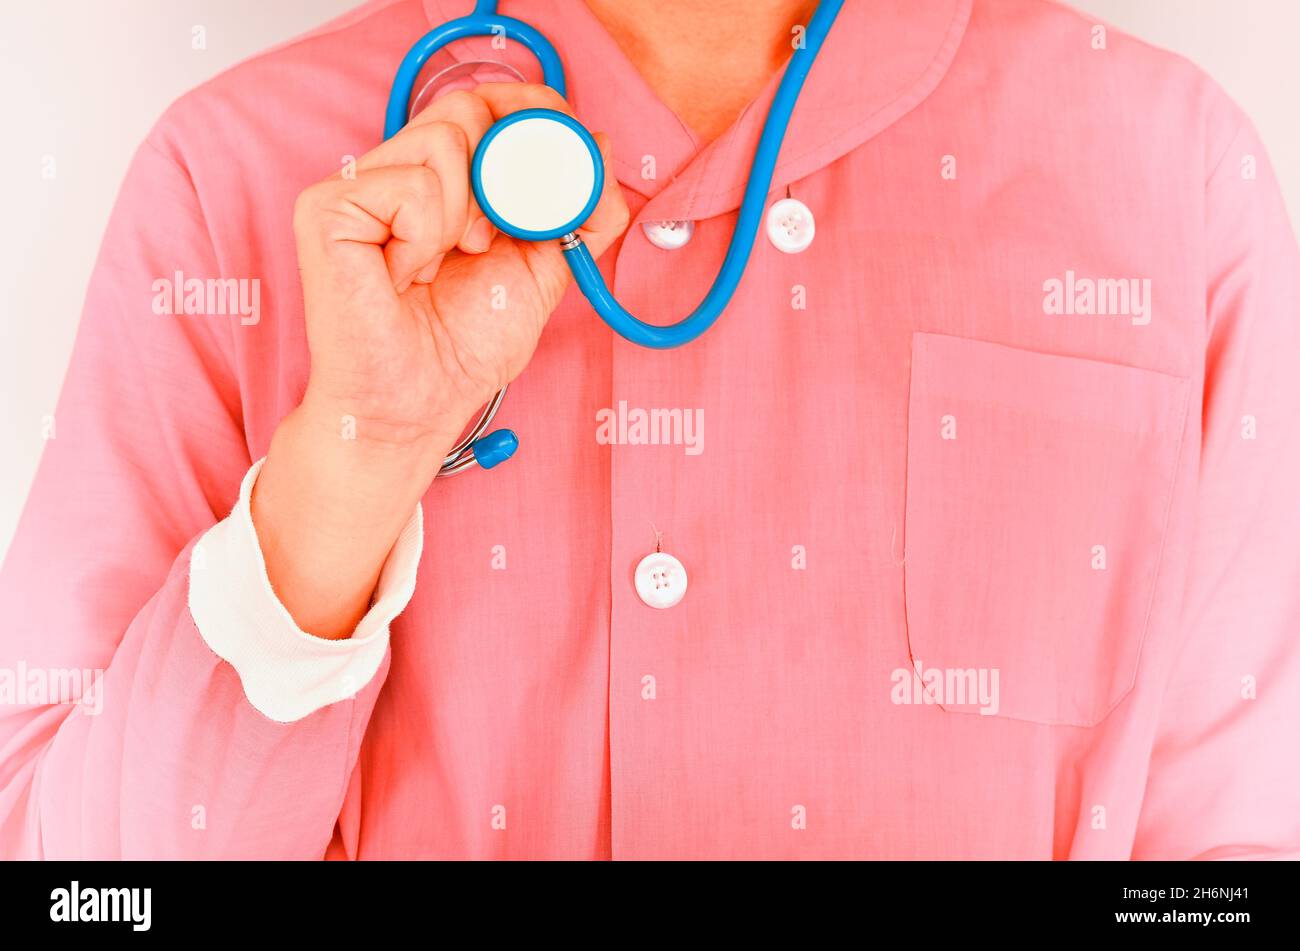 Better physical examination your health now Stock Photo